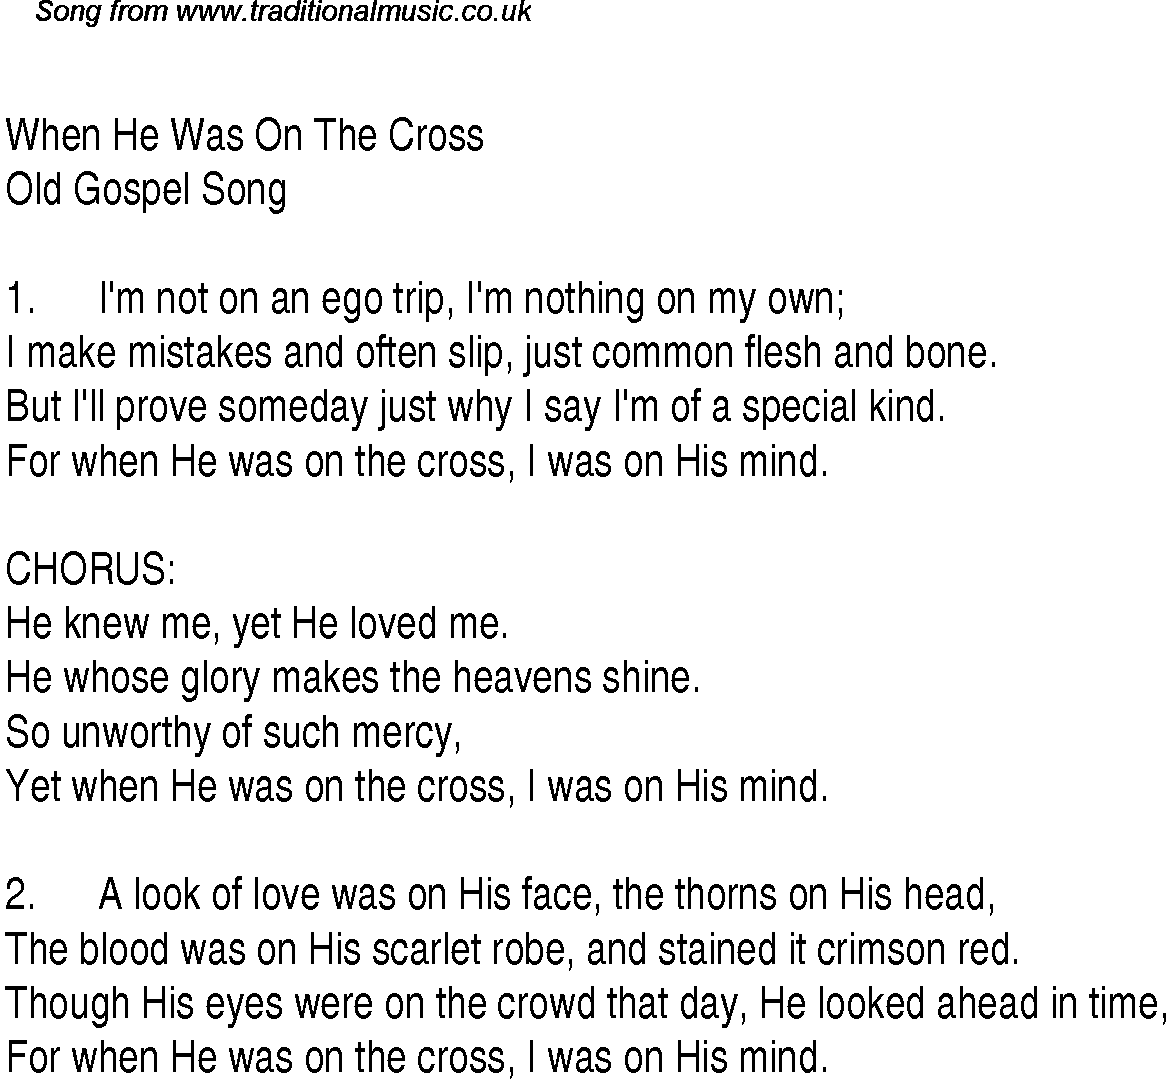 Gospel Song: when-he-was-on-the-cross, lyrics and chords.